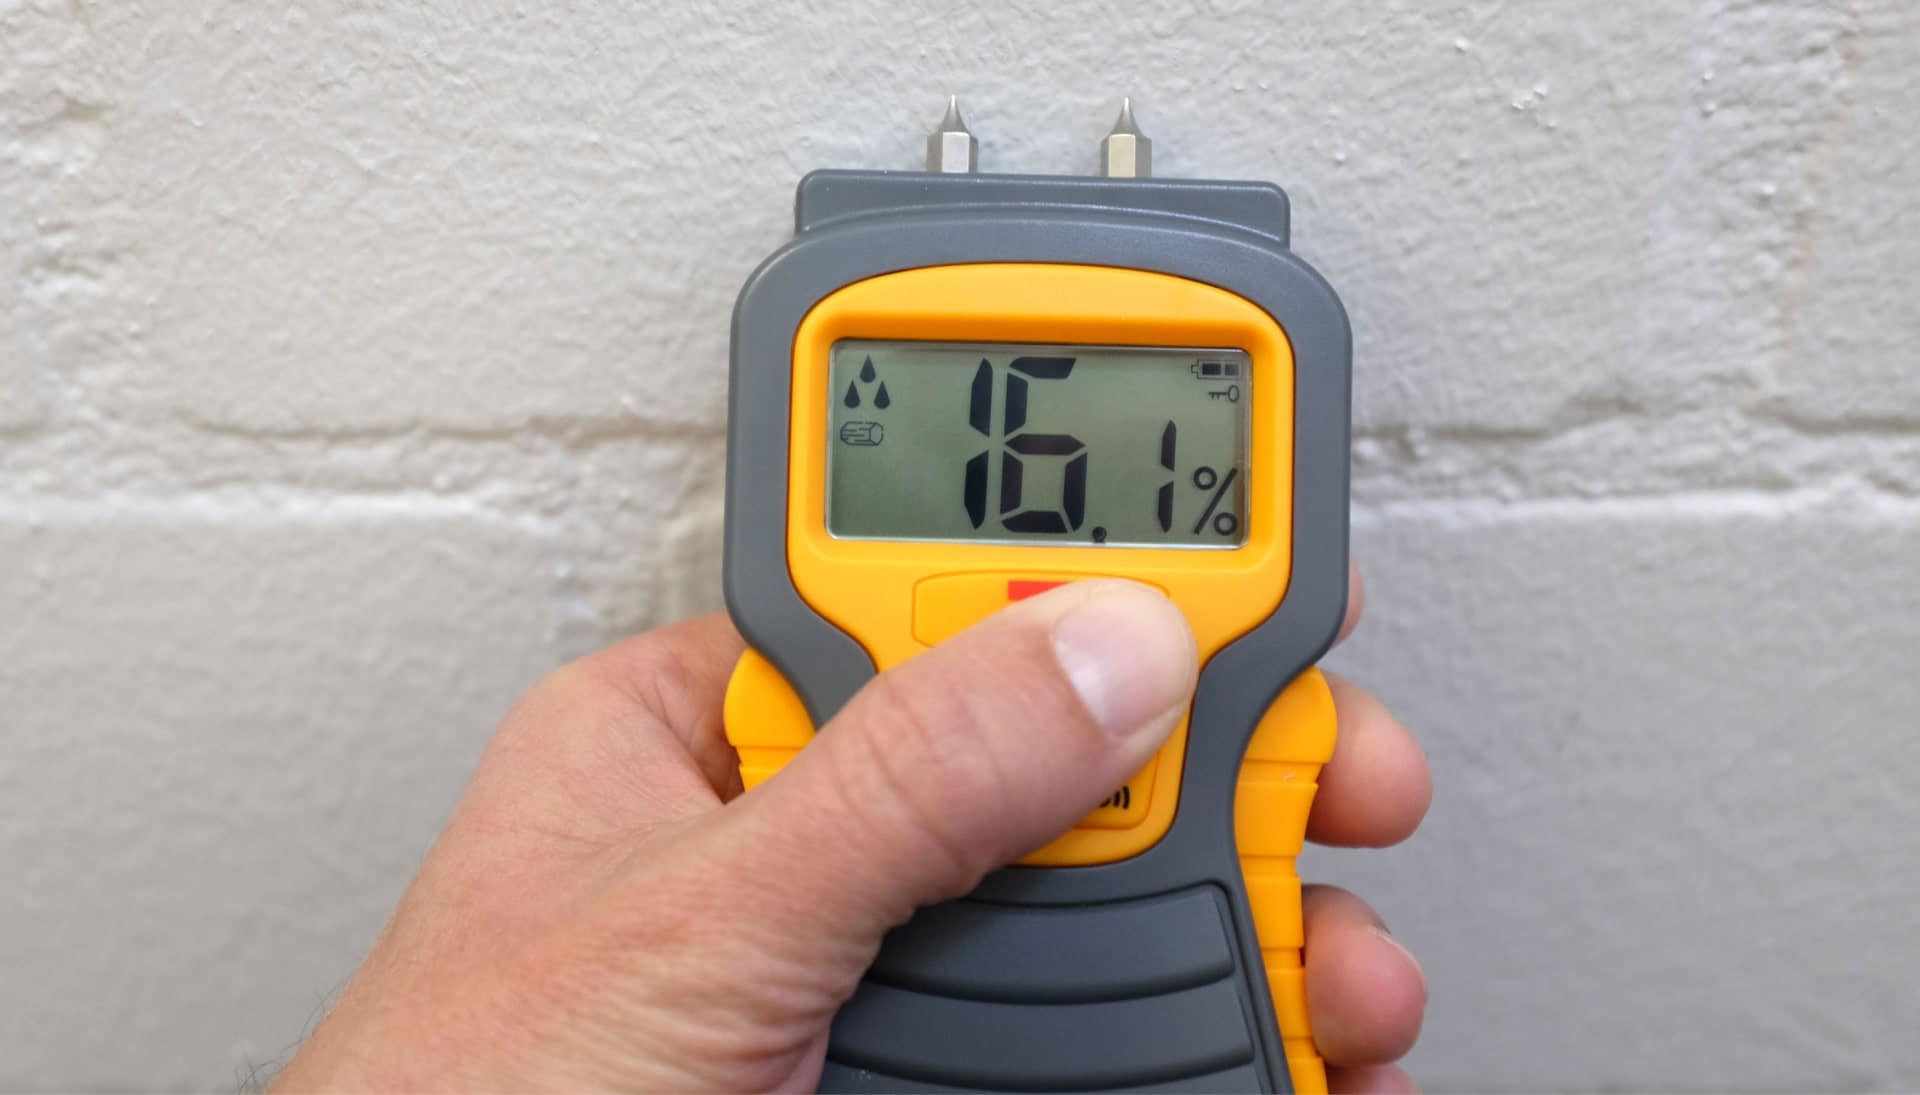 We provide fast, accurate, and affordable mold testing services in Bellevue, Washington.